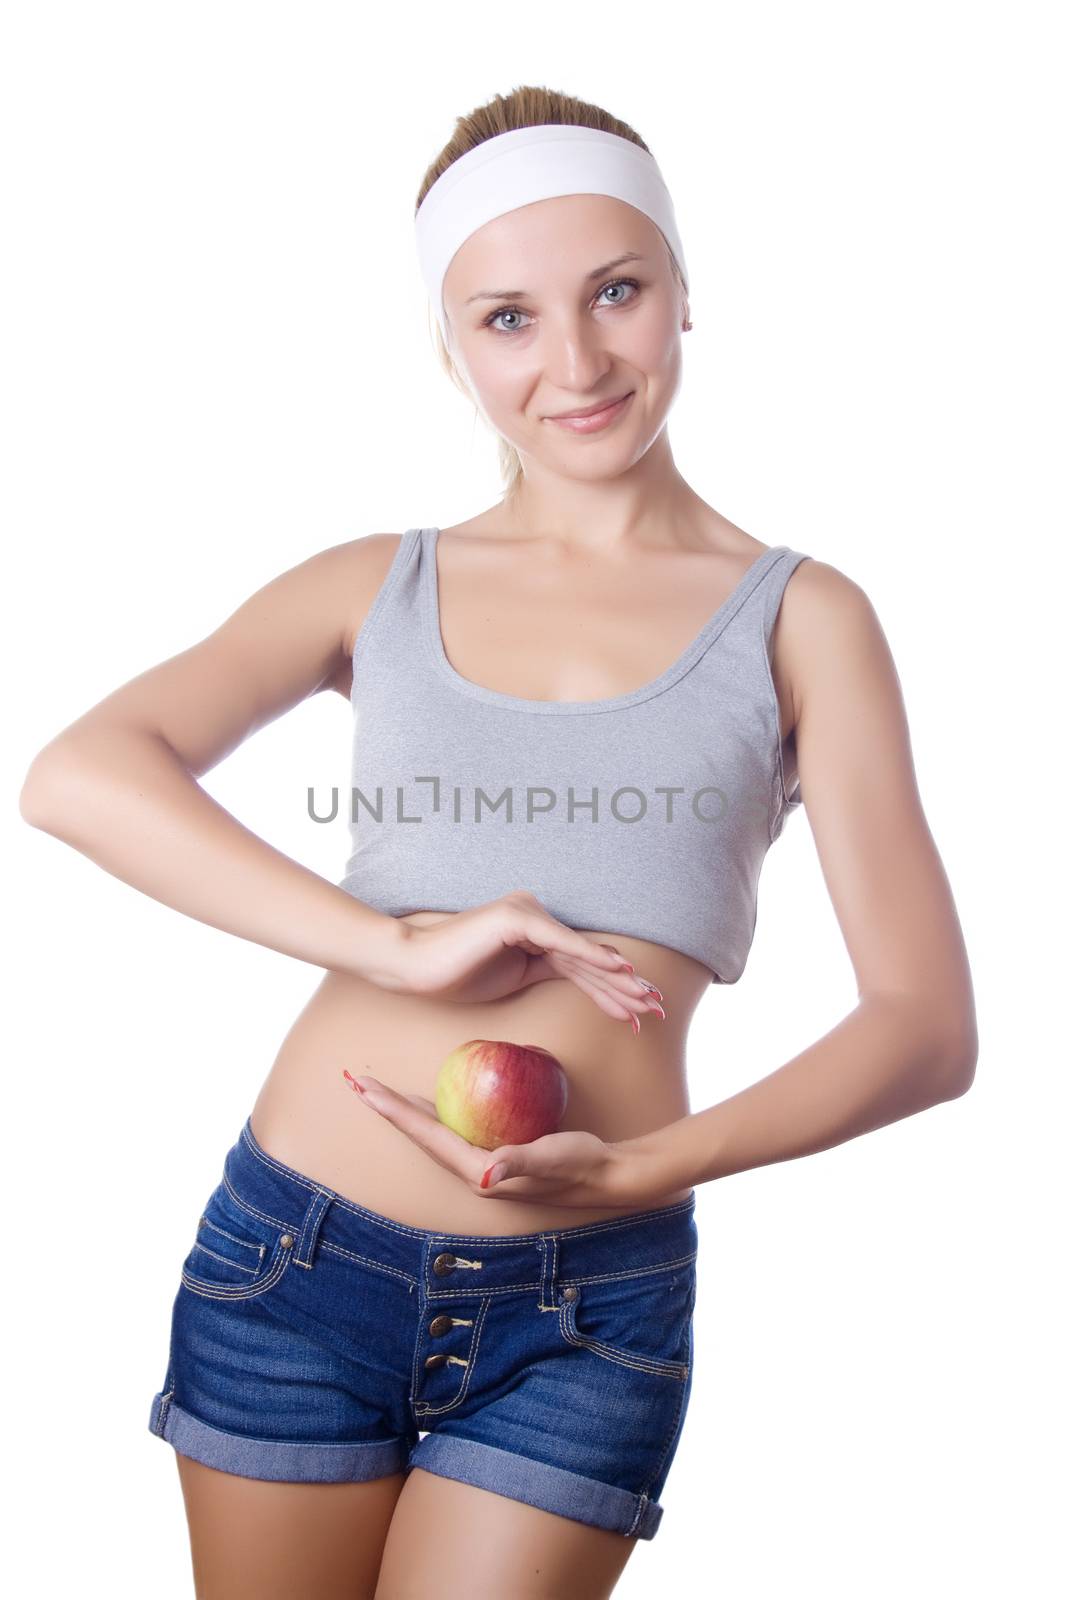 Perfect Slim Woman Body and apple on white background. Diet Concept